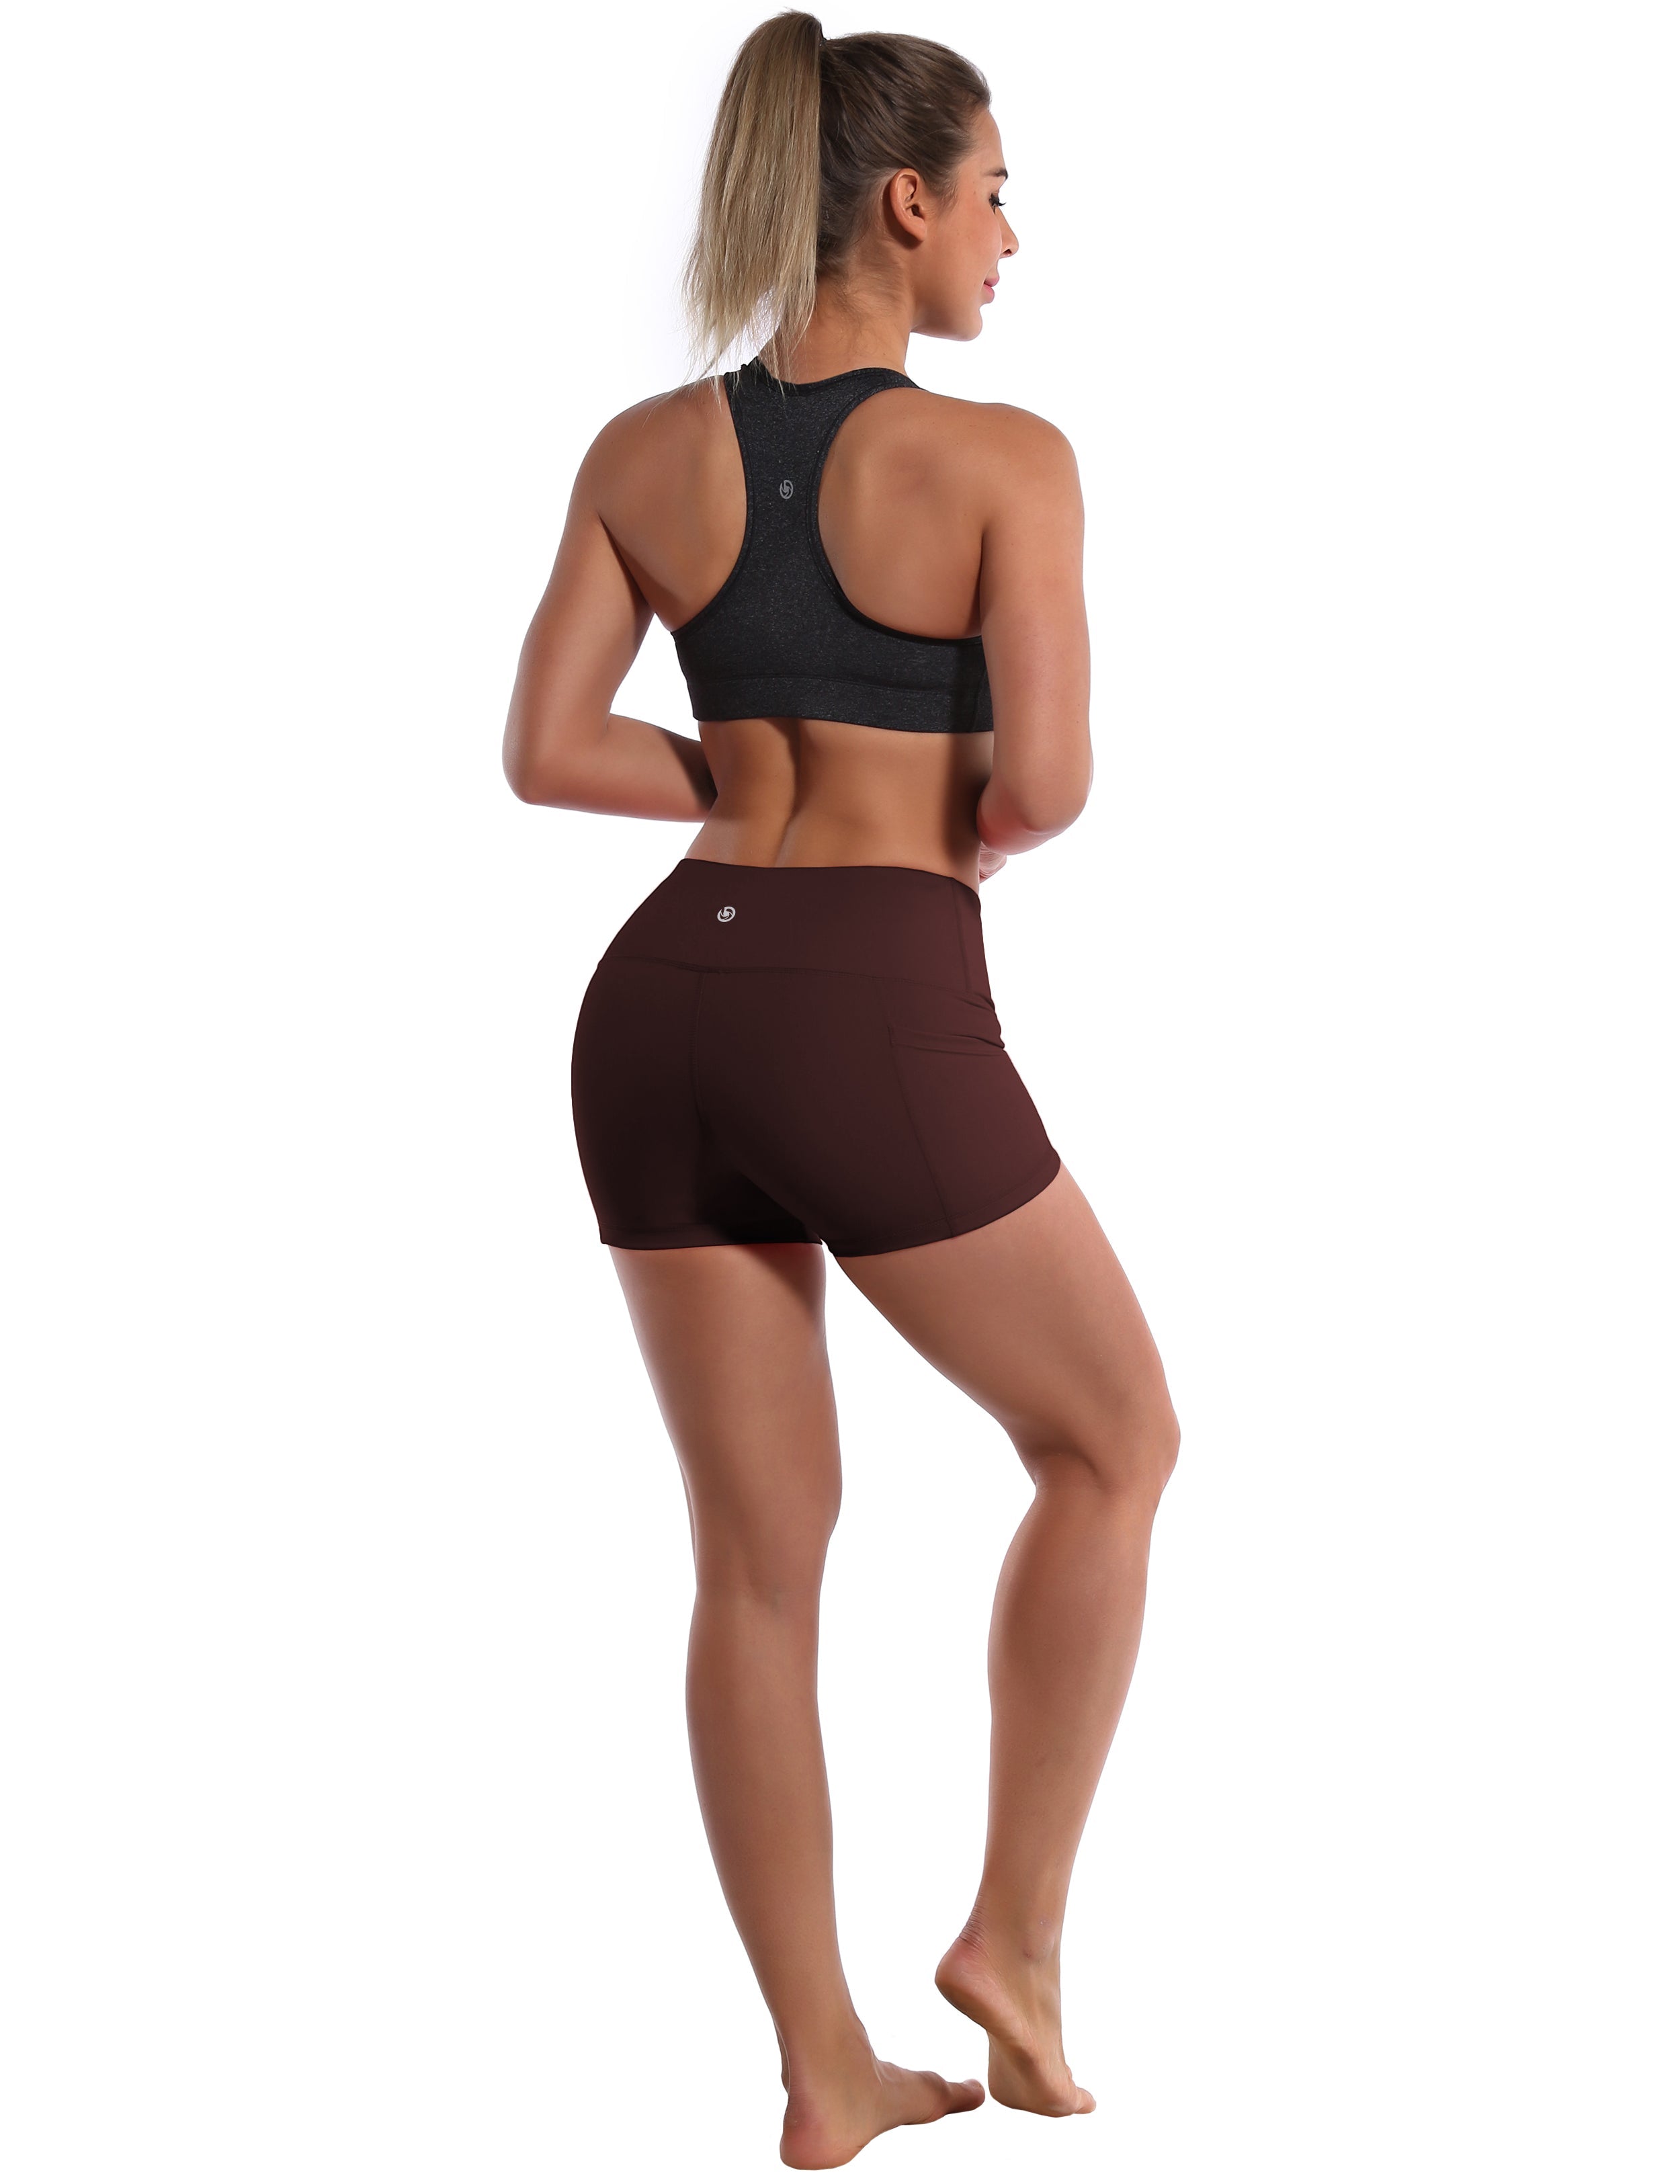 2.5" Side Pockets Golf Shorts mahoganymaroon Sleek, soft, smooth and totally comfortable: our newest sexy style is here. Softest-ever fabric High elasticity High density 4-way stretch Fabric doesn't attract lint easily No see-through Moisture-wicking Machine wash 78% Polyester, 22% Spandex